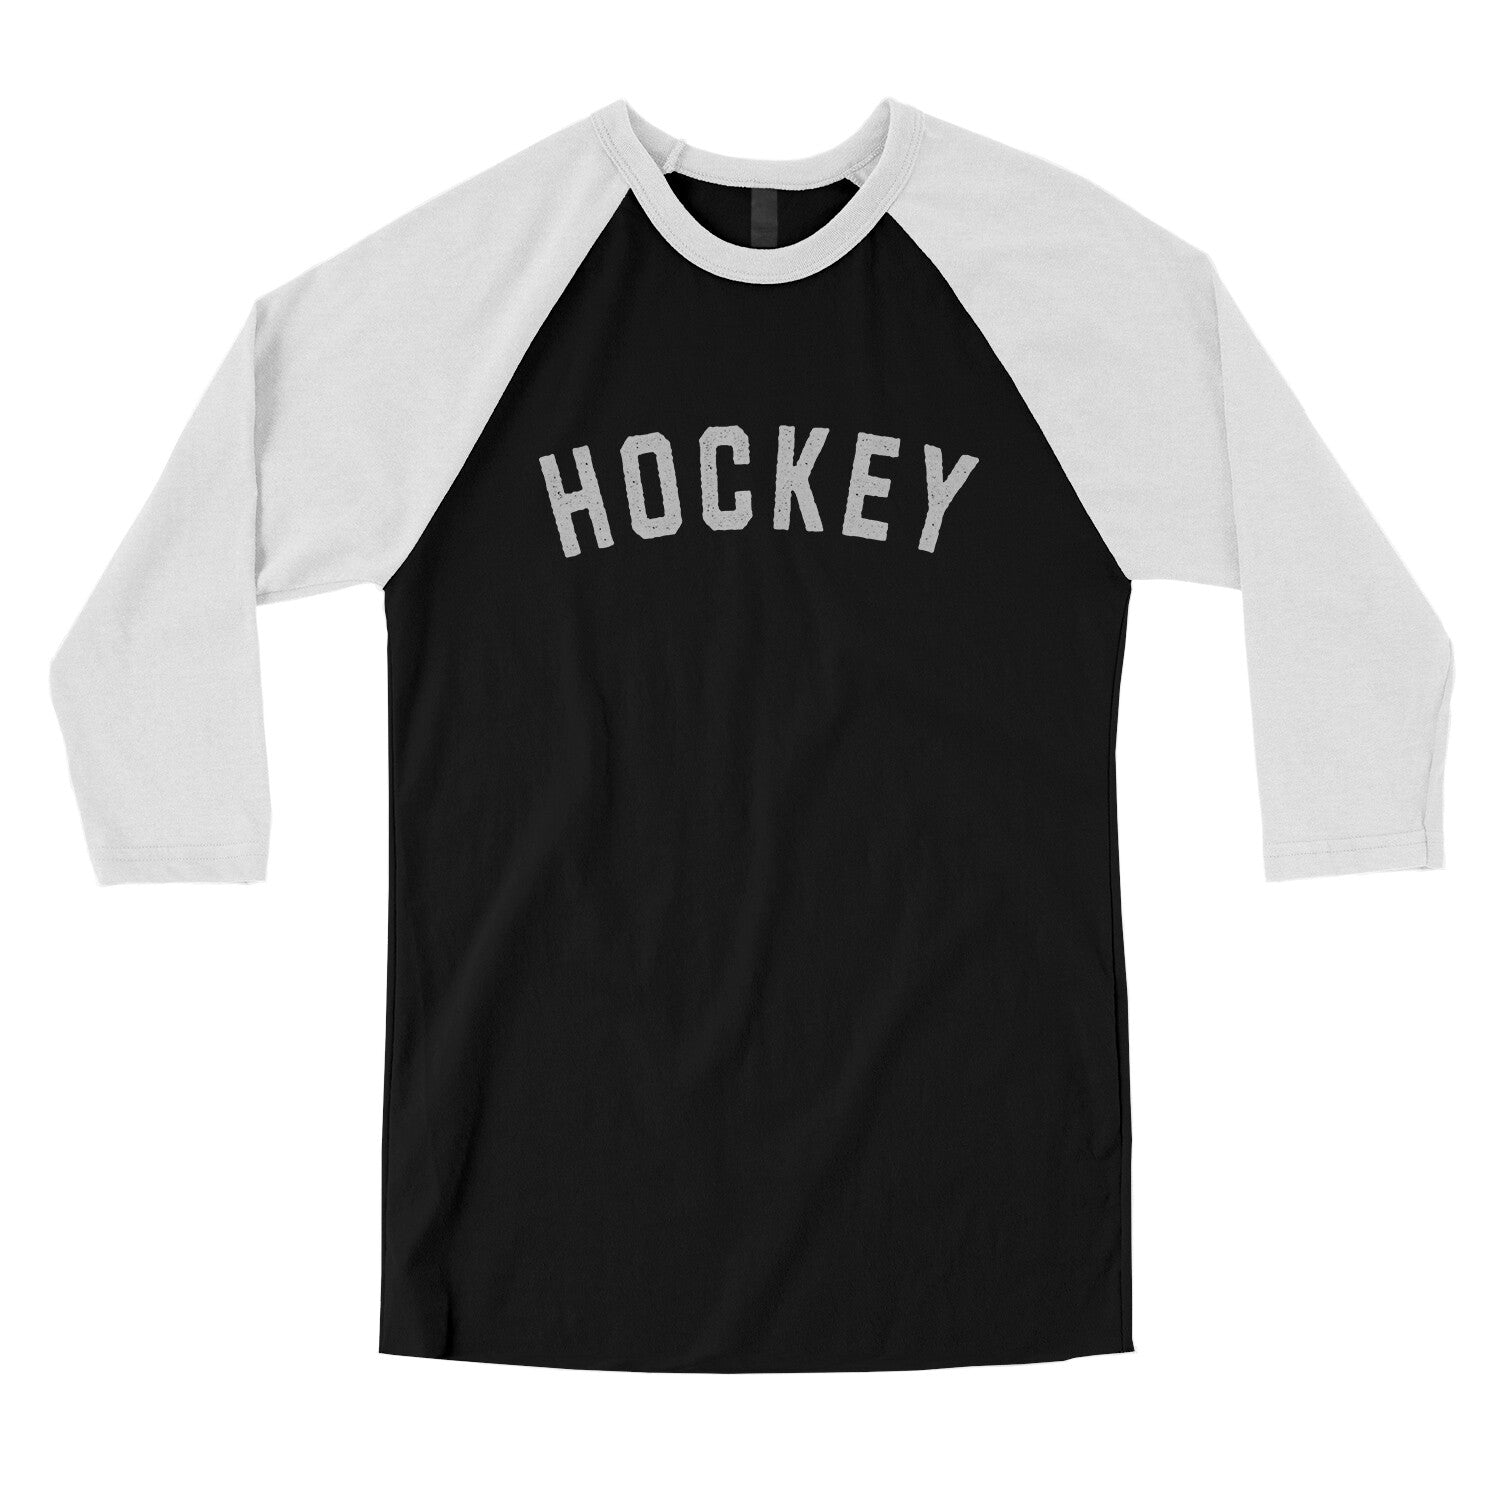 Hockey in Black with White Color